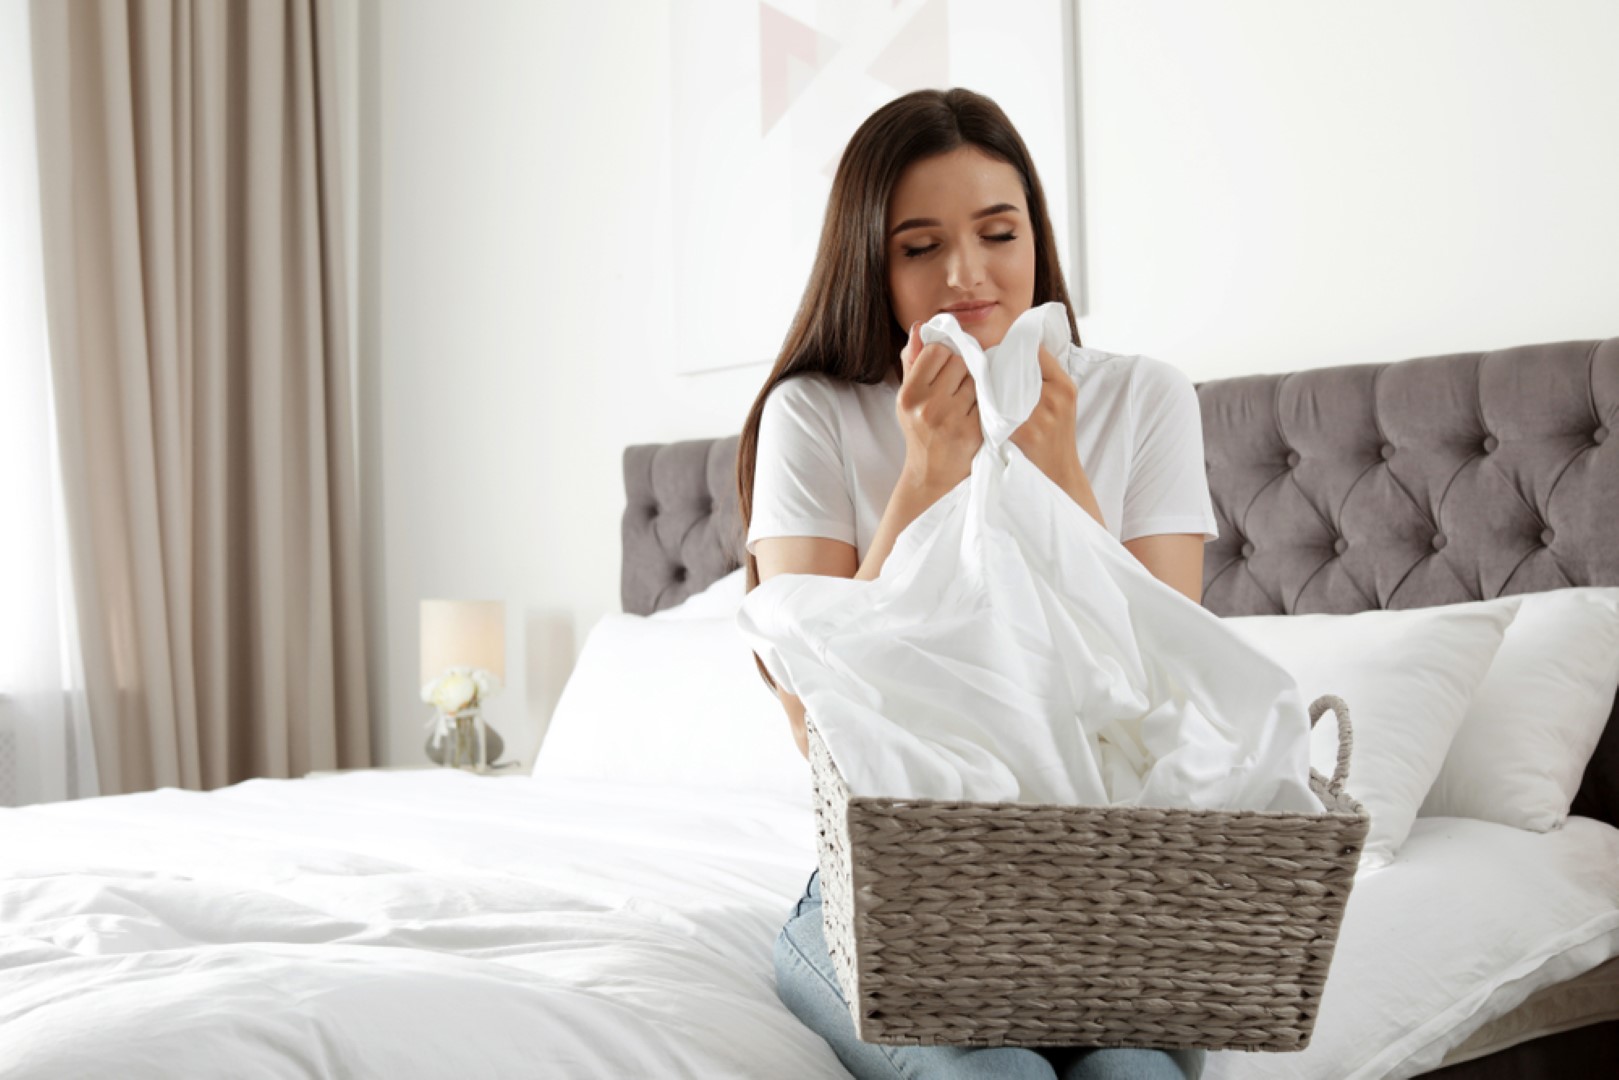 5 Spring Cleaning Tips to Help with a Better Night's Sleep